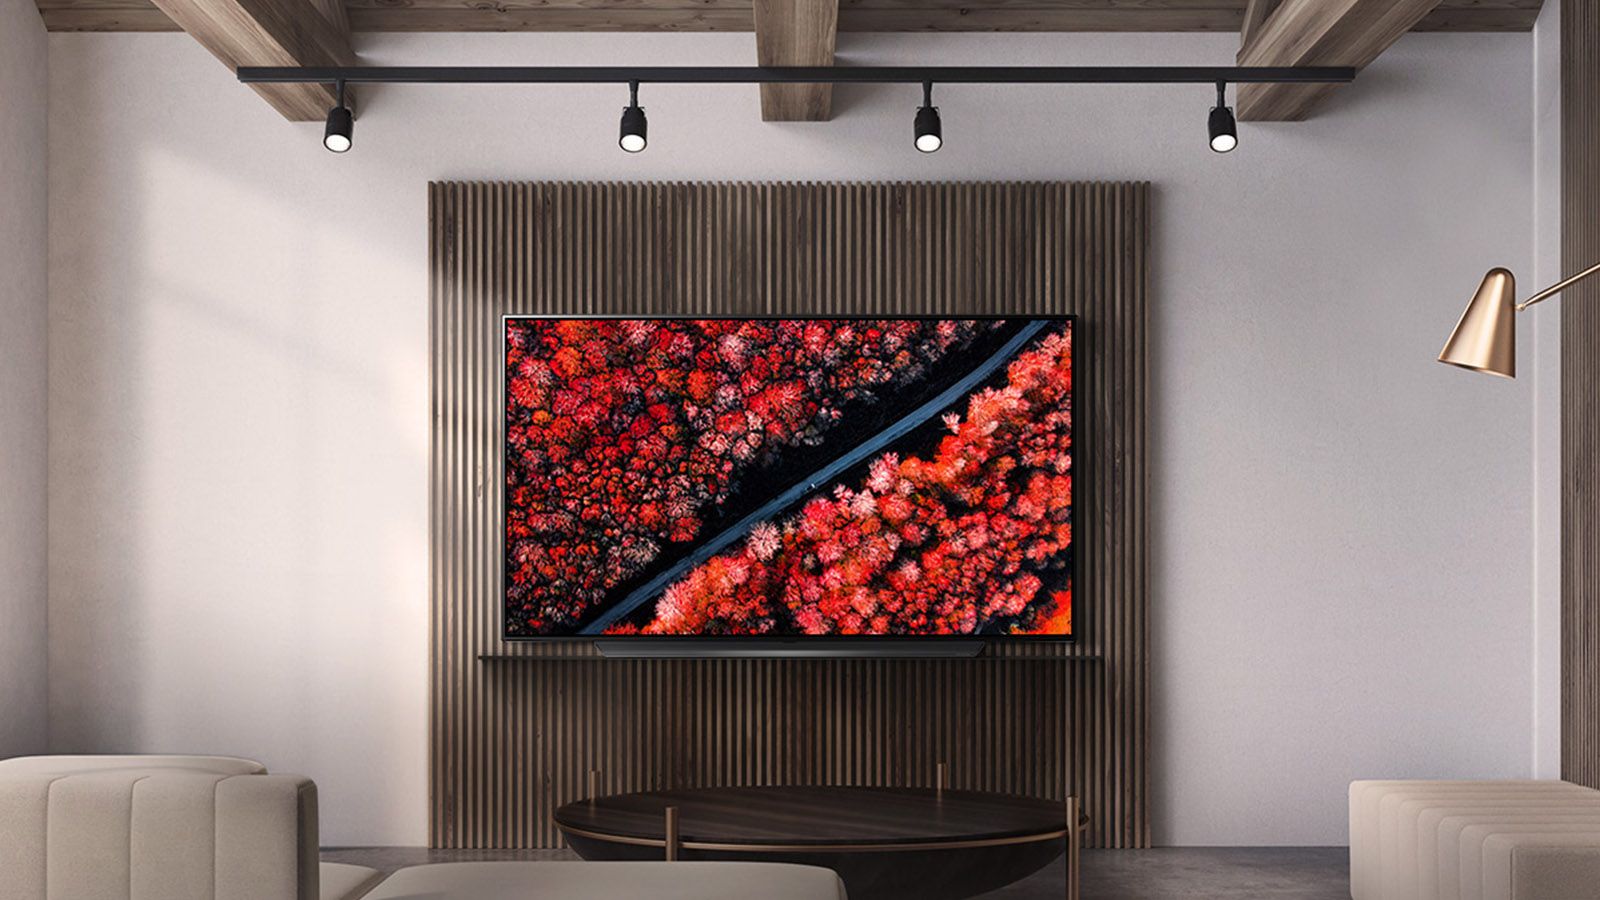 Grab an LG OLED TV bargain and get free Sky thrown in image 1